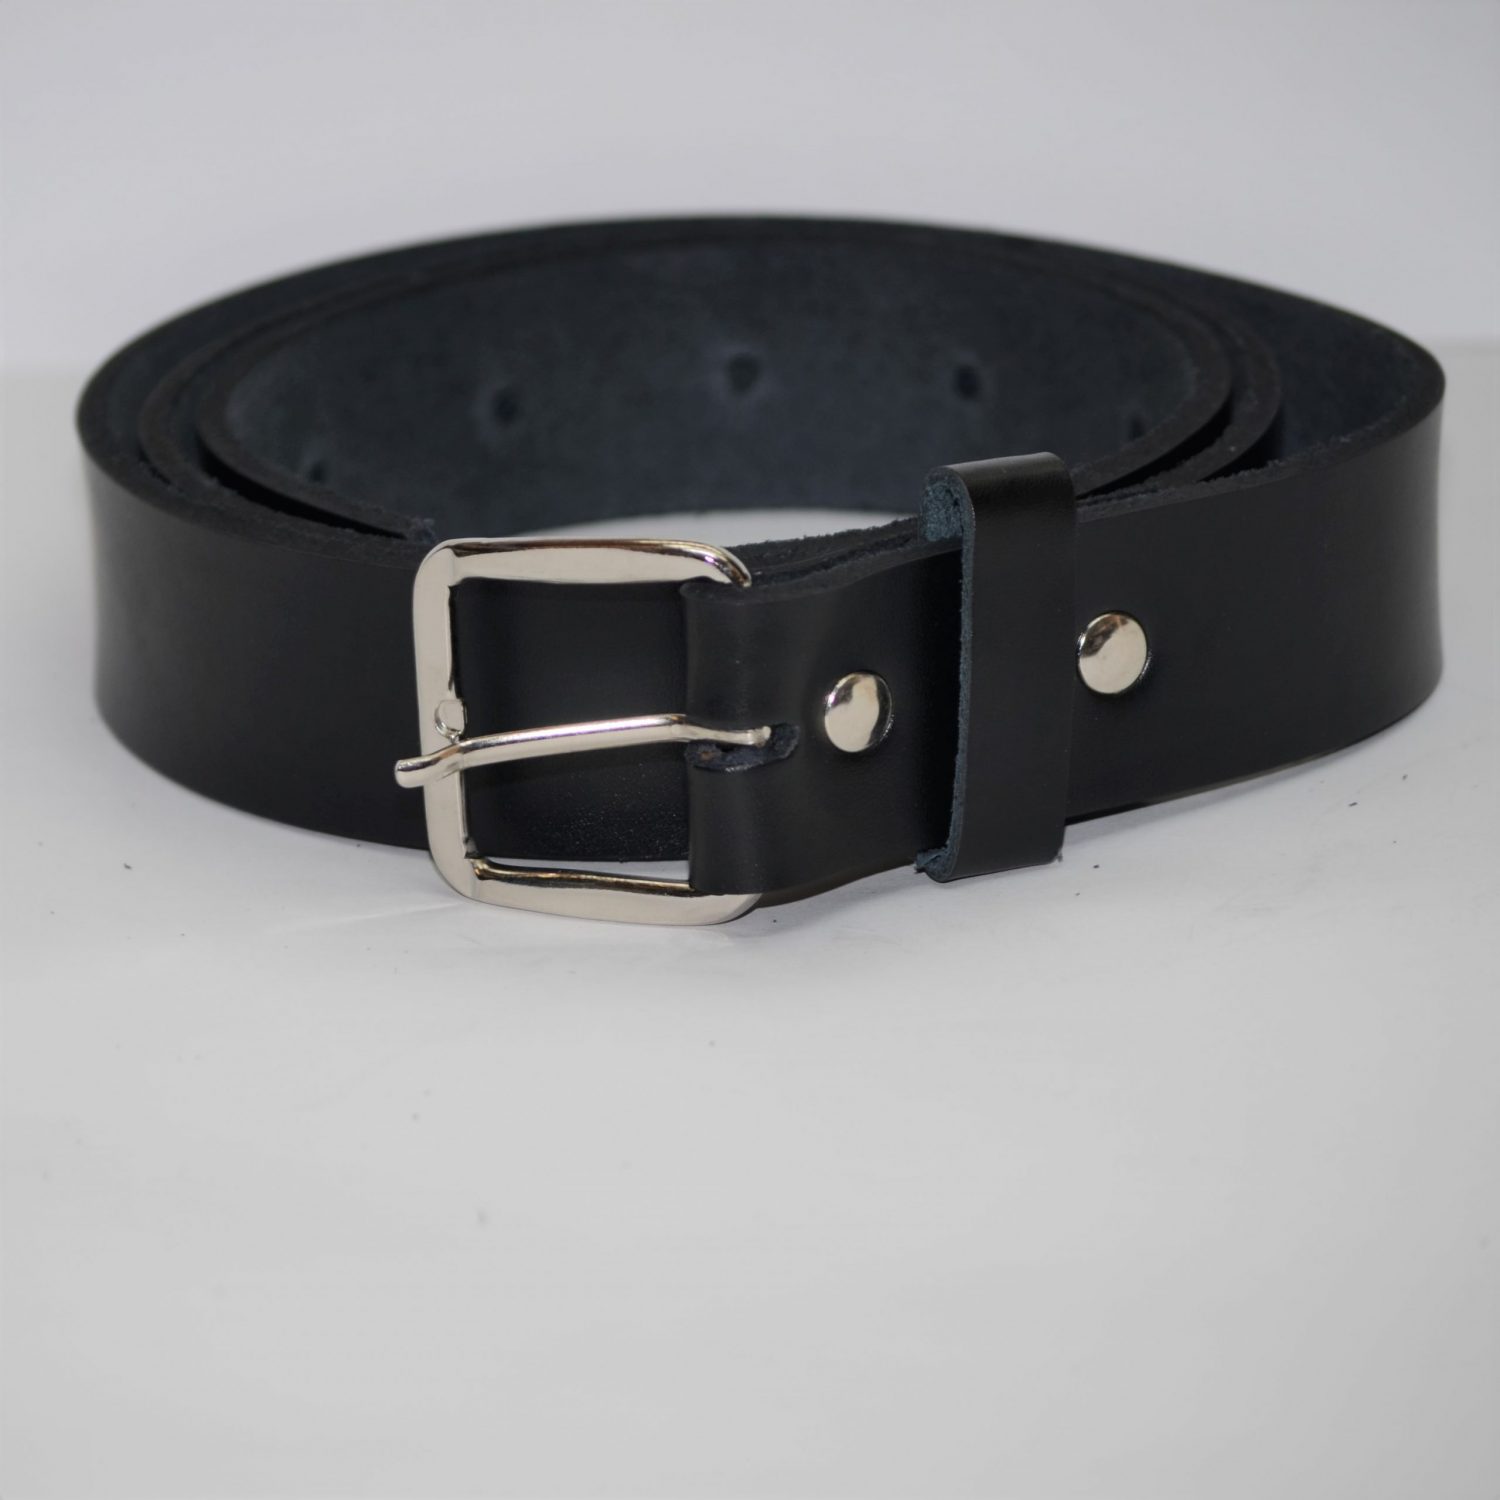 Tanmark Leather Belt With Square Buckle 1¼